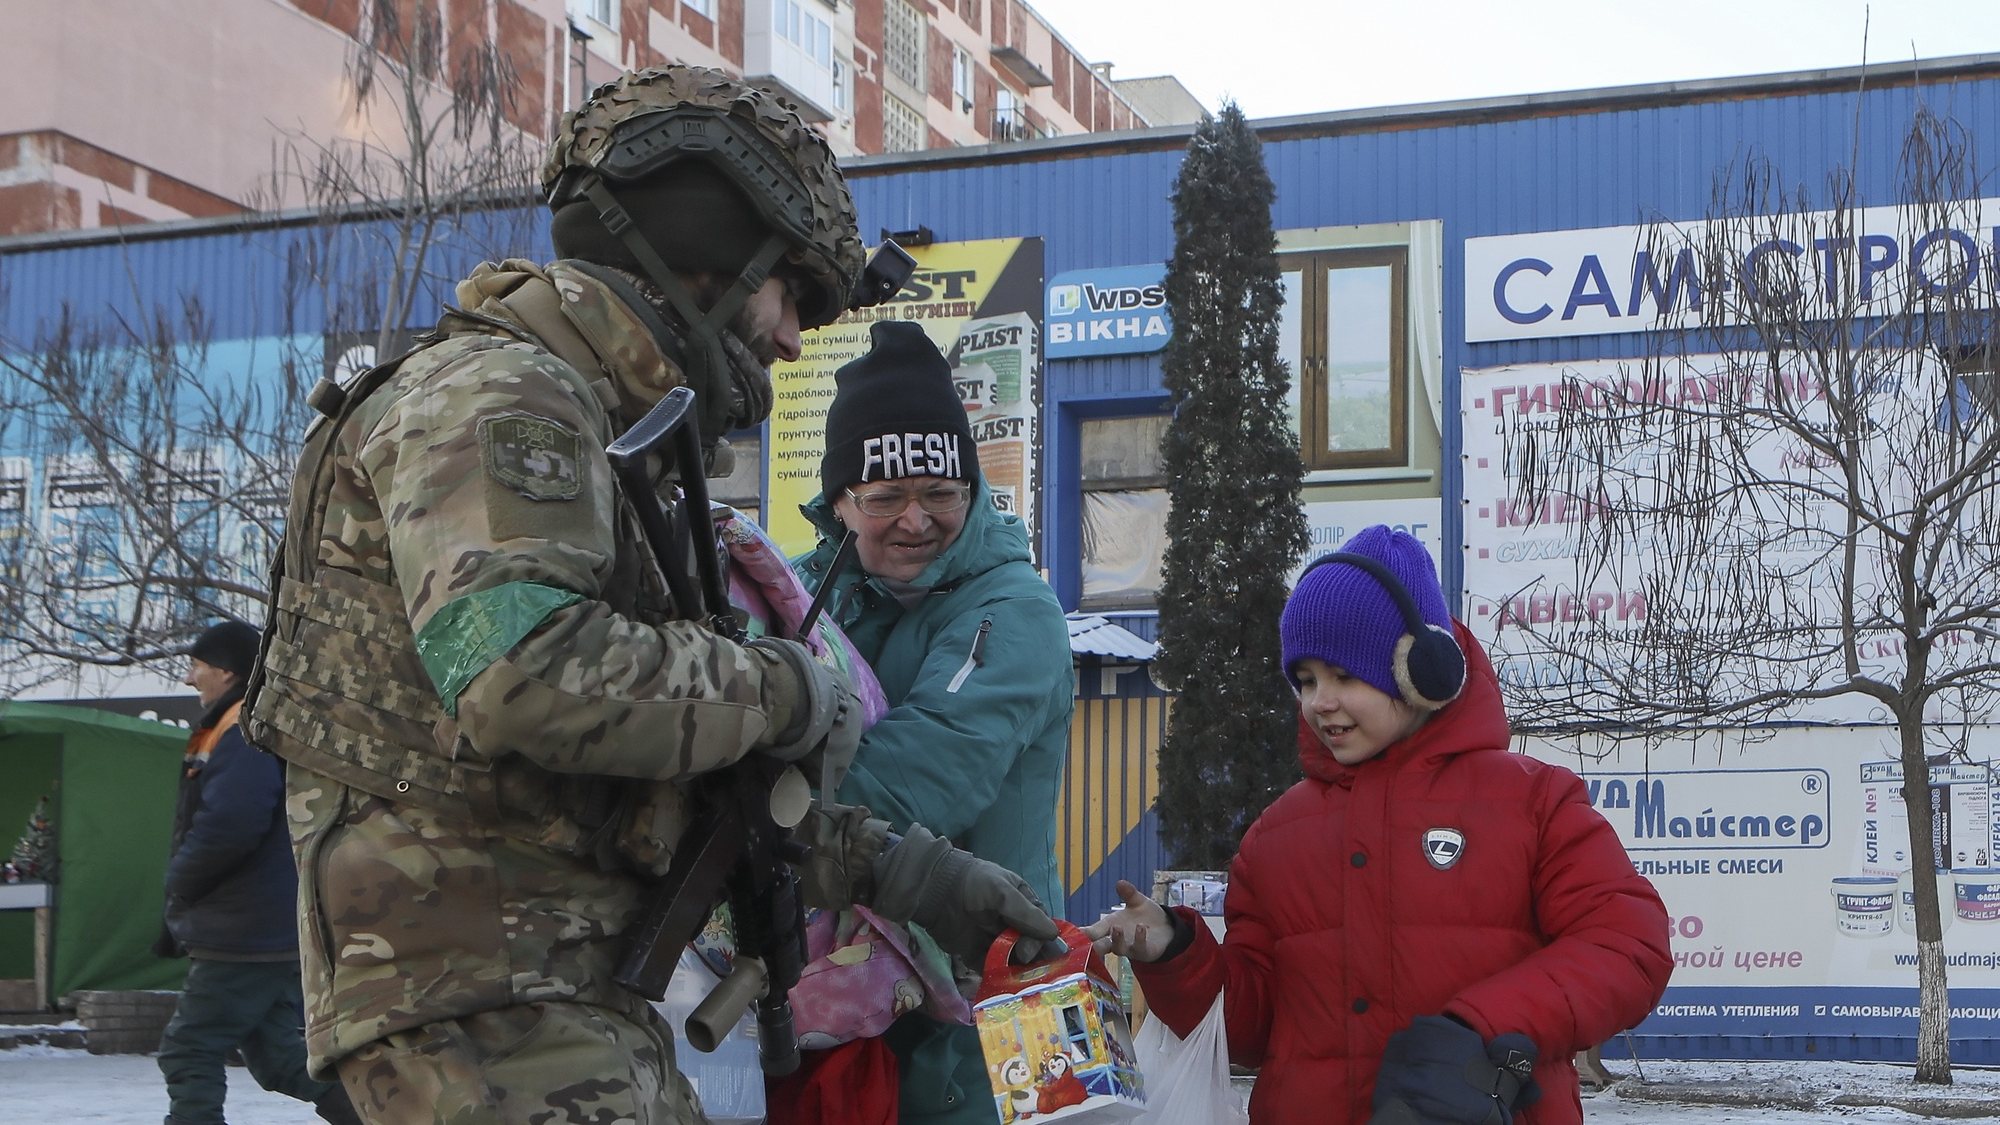 epa10397091 A Ukrainian serviceman hands candies to a girl at a street of Bakhmut, Donetsk region, eastern Ukraine, 09 January 2023, amid Russia&#039;s invasion. For months the front-line city of Bakhmut has seen heavy fighting taking place as it has been a key target for Russian forces. Russian troops on 24 February 2022, entered Ukrainian territory, starting a conflict that has provoked destruction and a humanitarian crisis.  EPA/MYKOLA TYMCHENKO